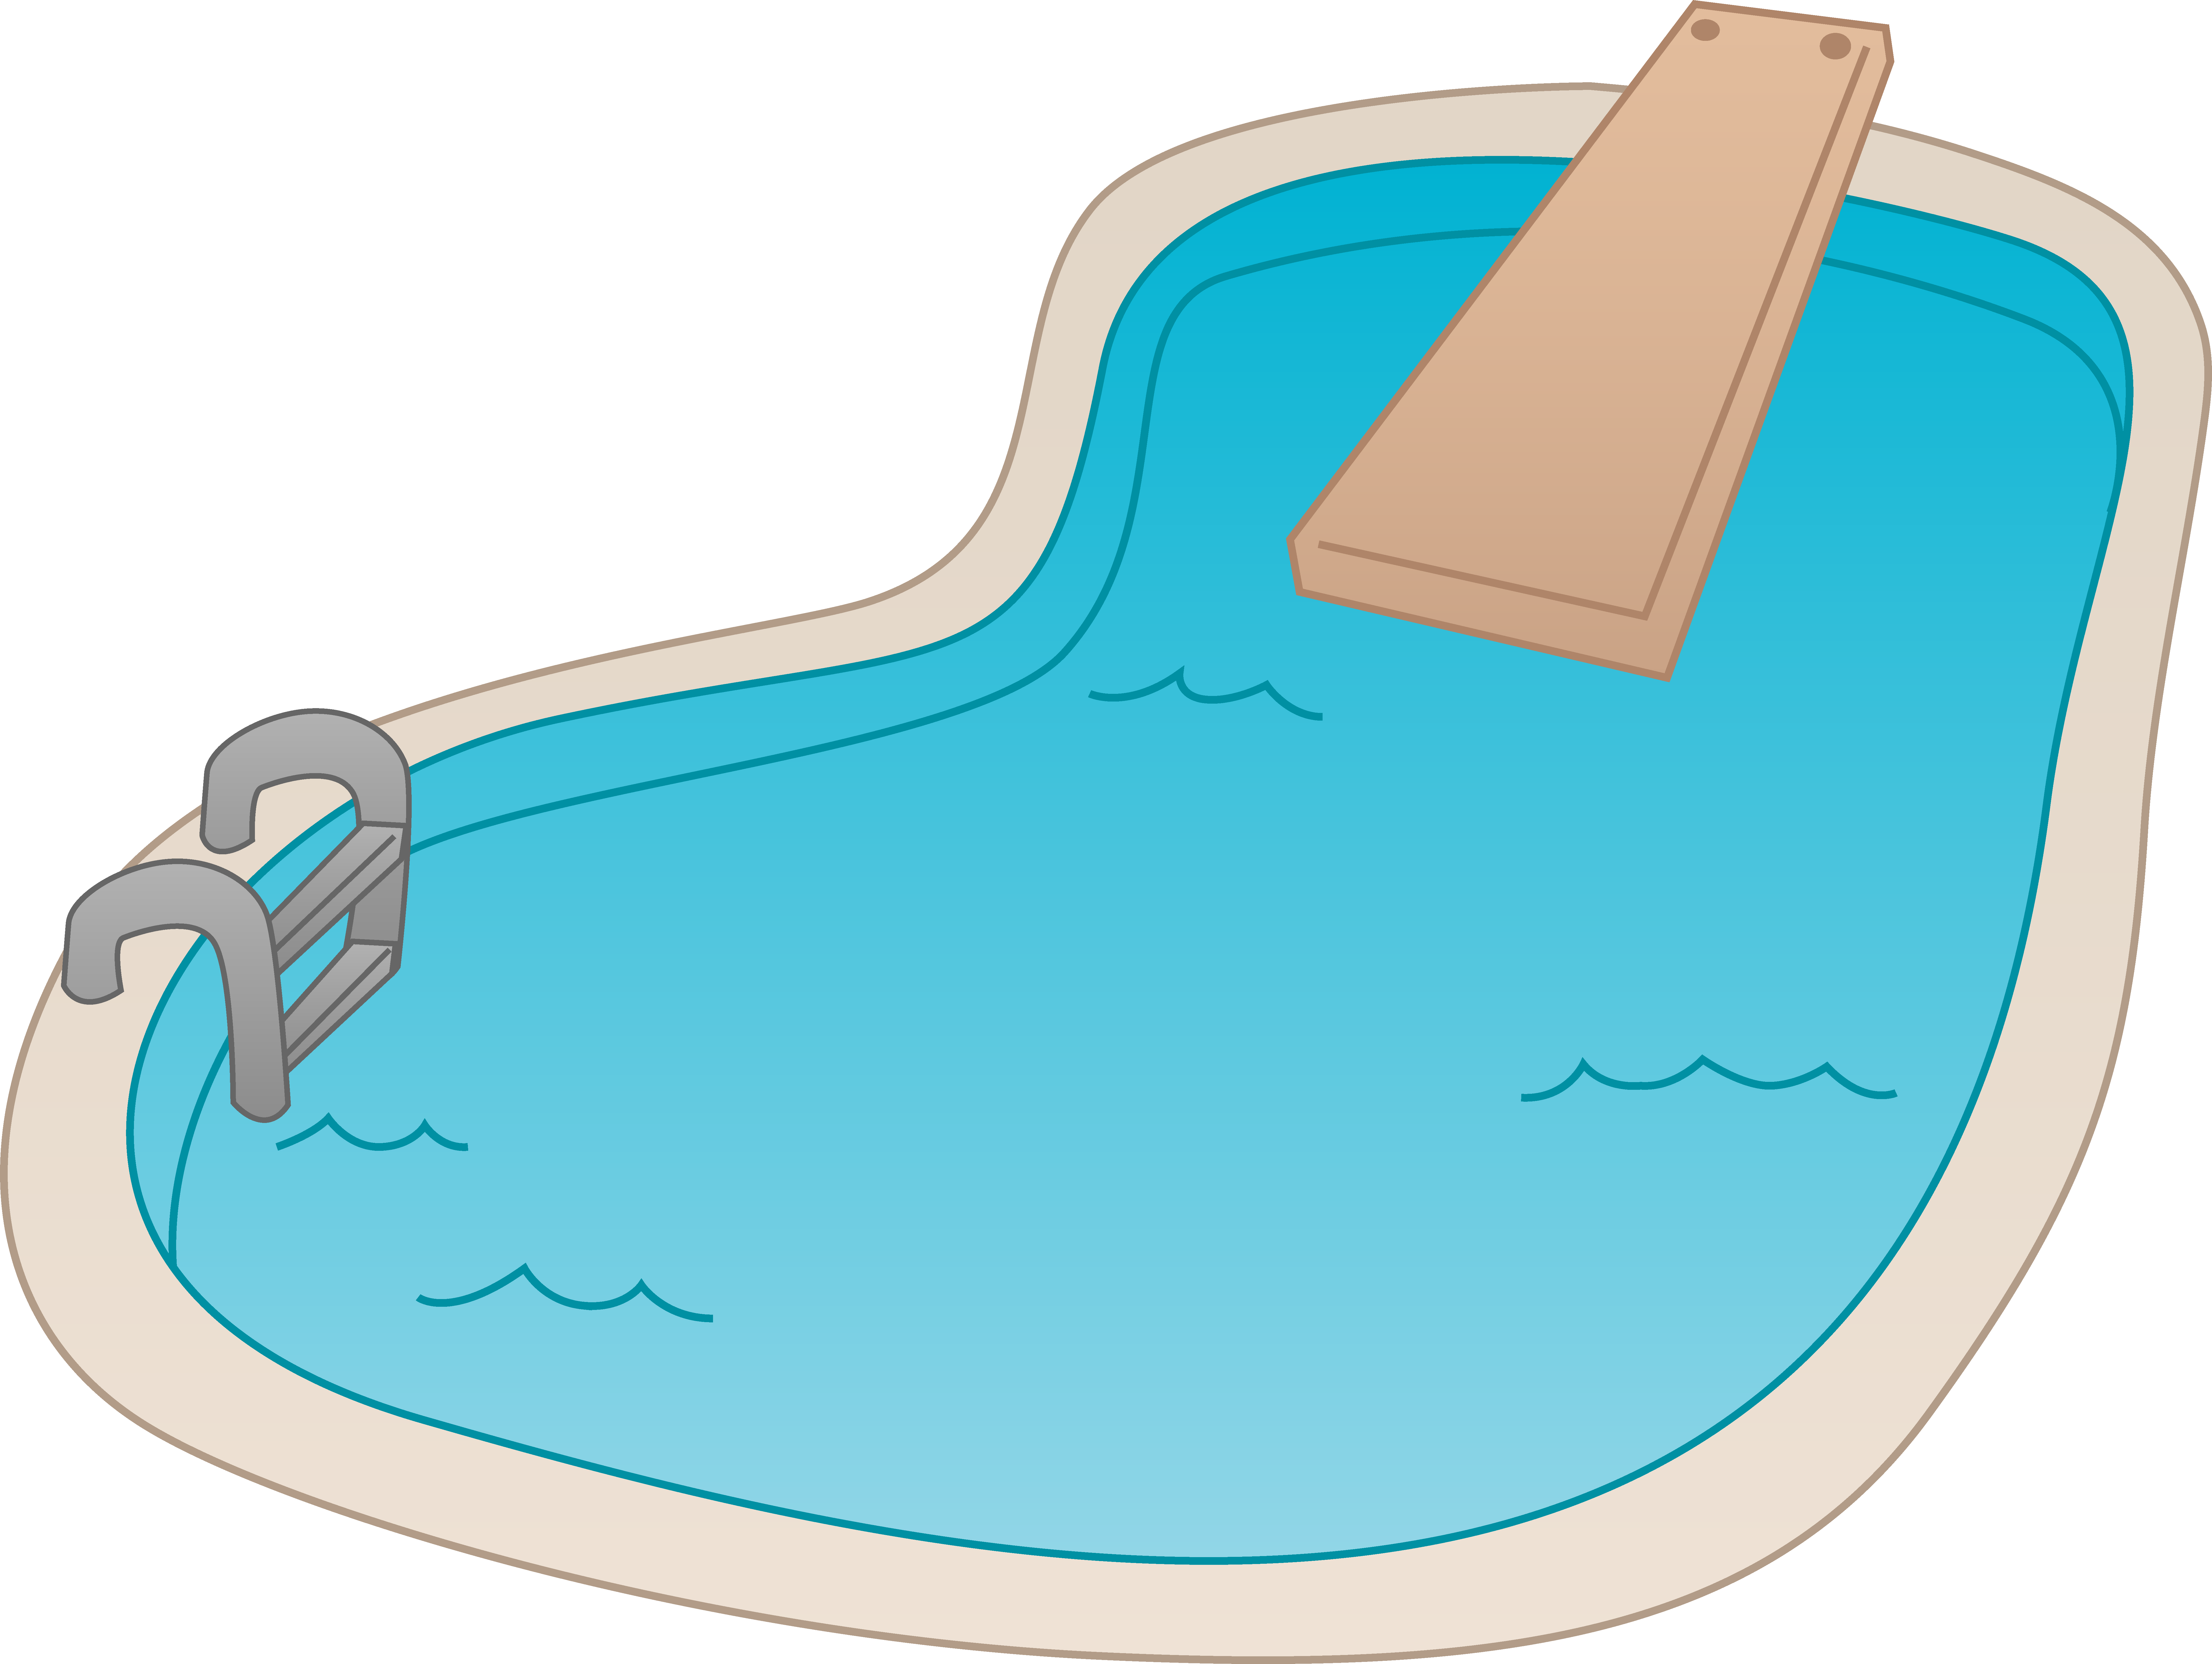 Swimming Pool With Diving Board Free Clip Art » Swimming Pool Cartoon Imagesswimming Pool With Diving Board ...